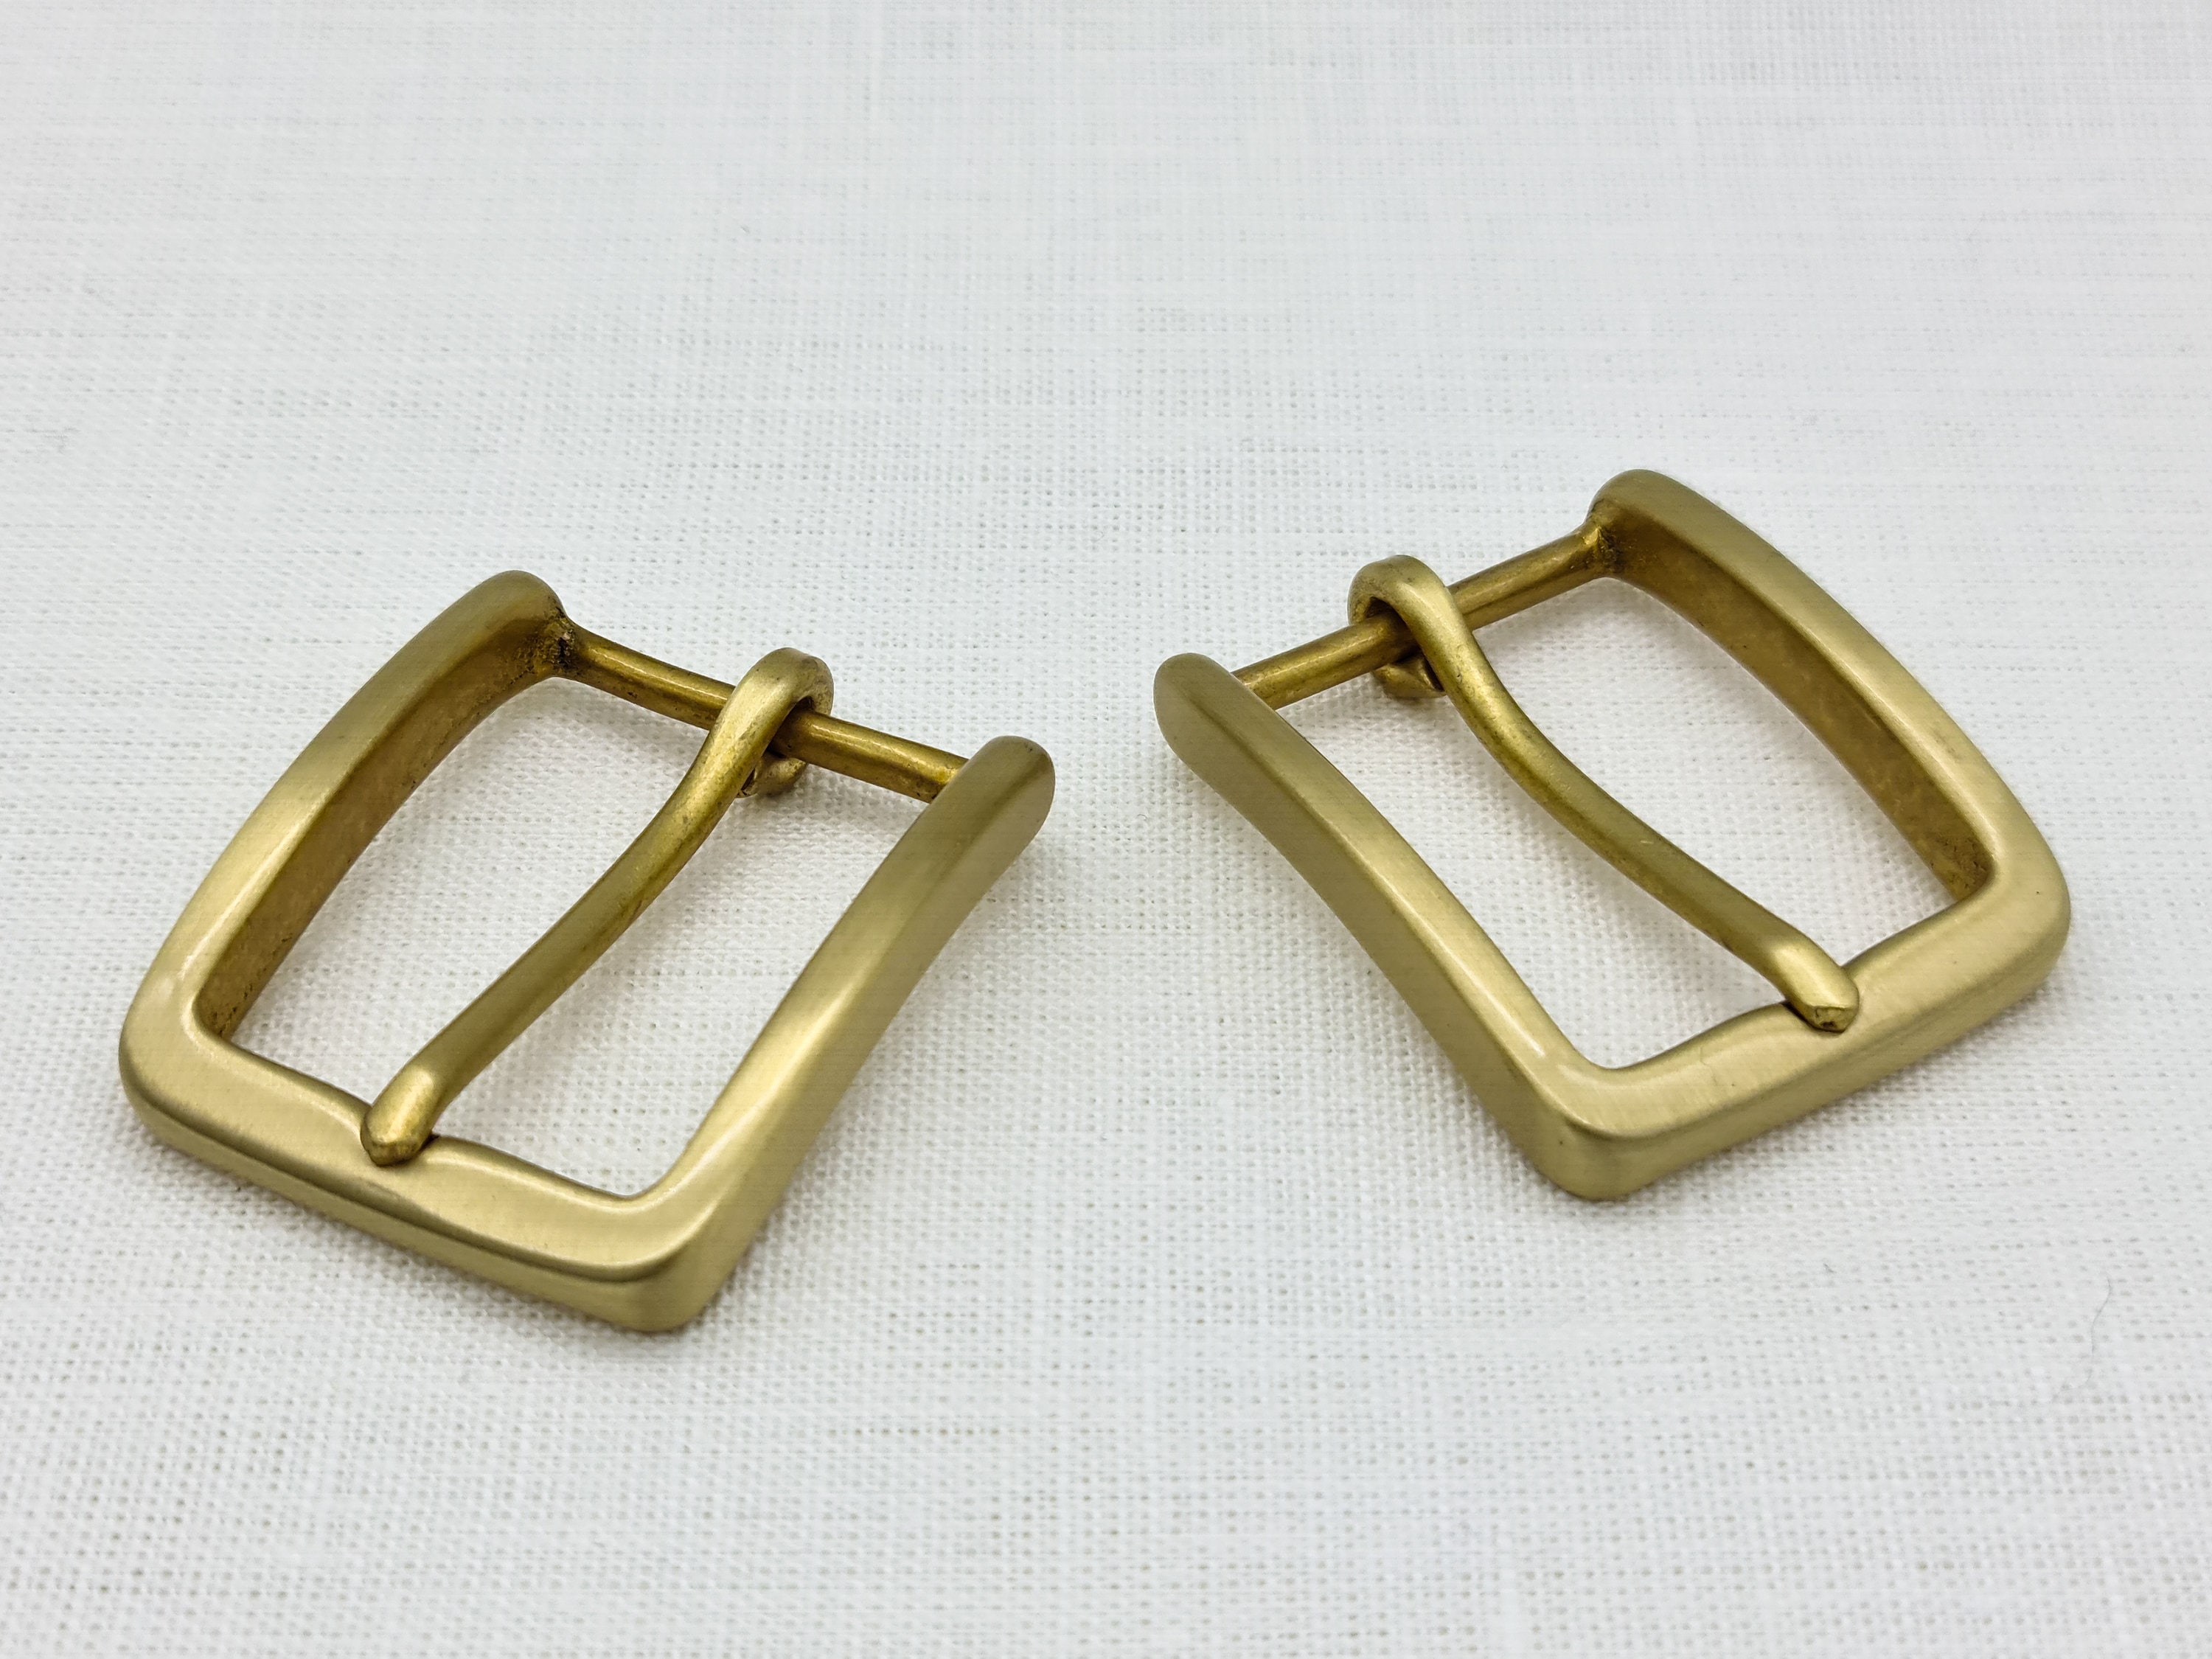  Belts.com Solid Brass Metal Buckle 1-3/8 (35mm) Wide :  Clothing, Shoes & Jewelry